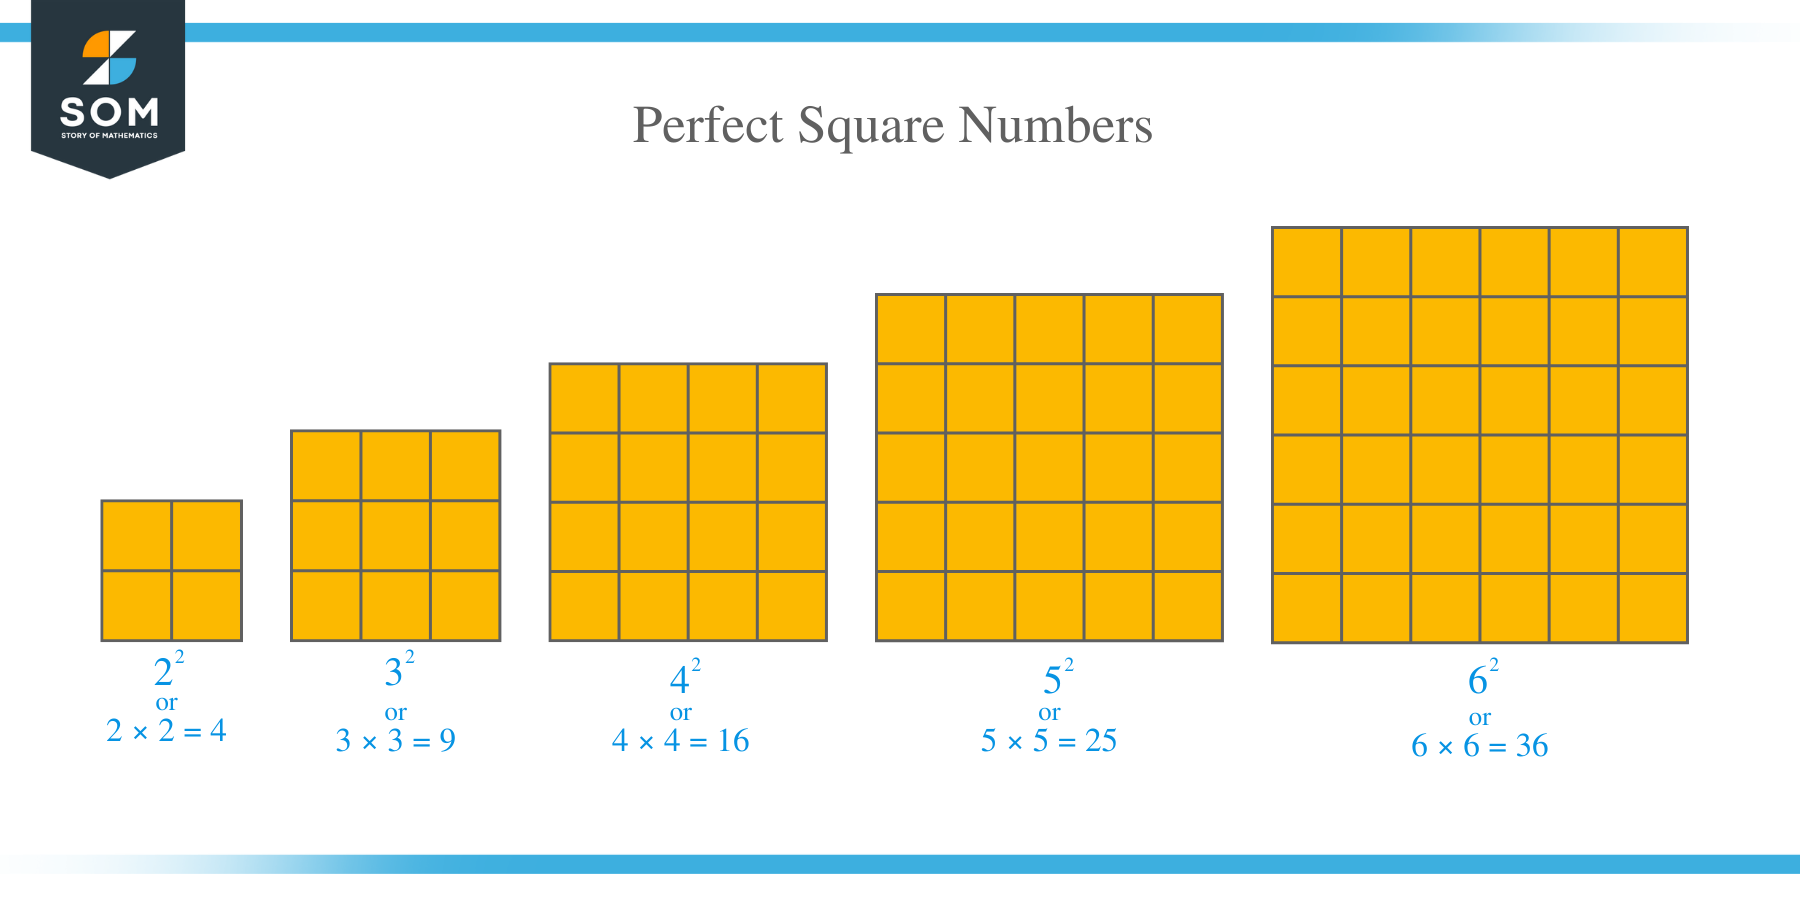 What is a Perfect Square?